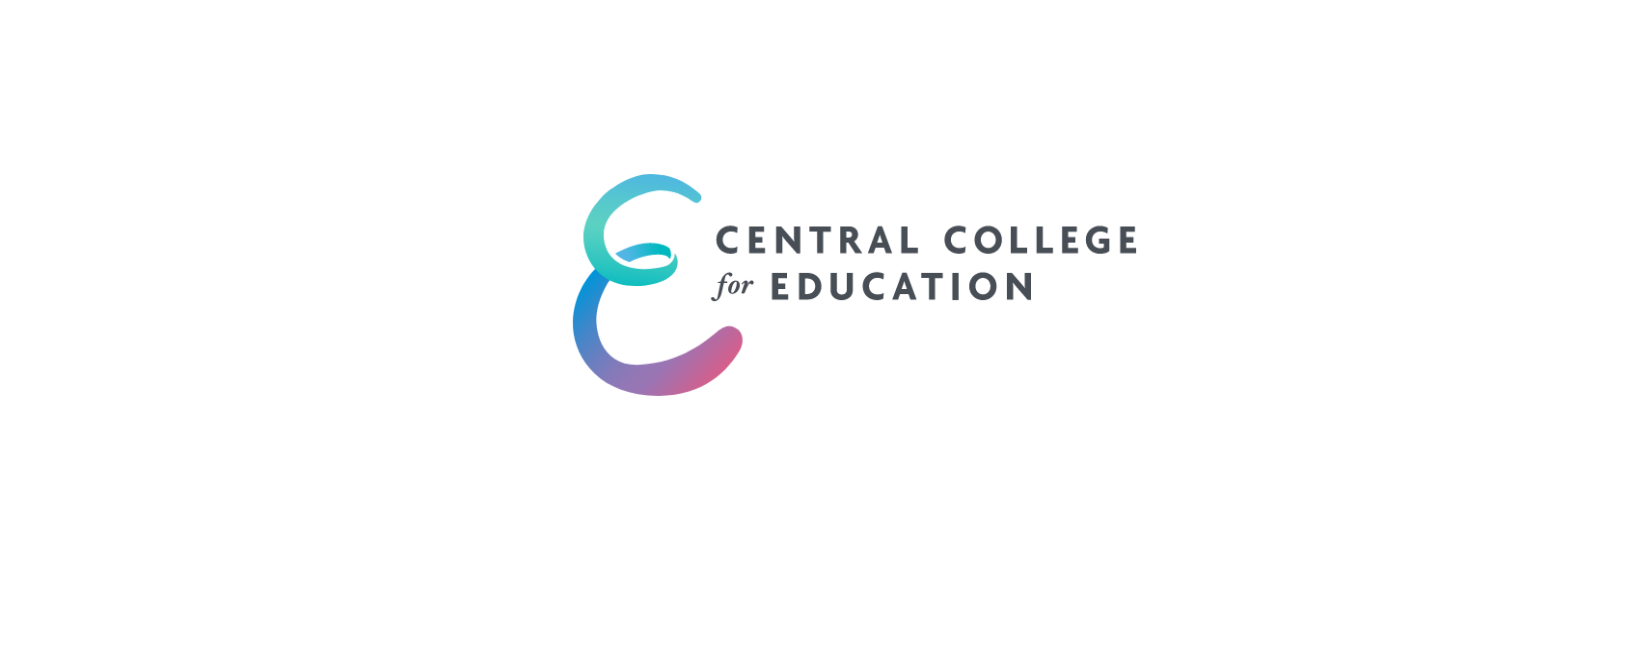 Central College for Education Discount Code 2022